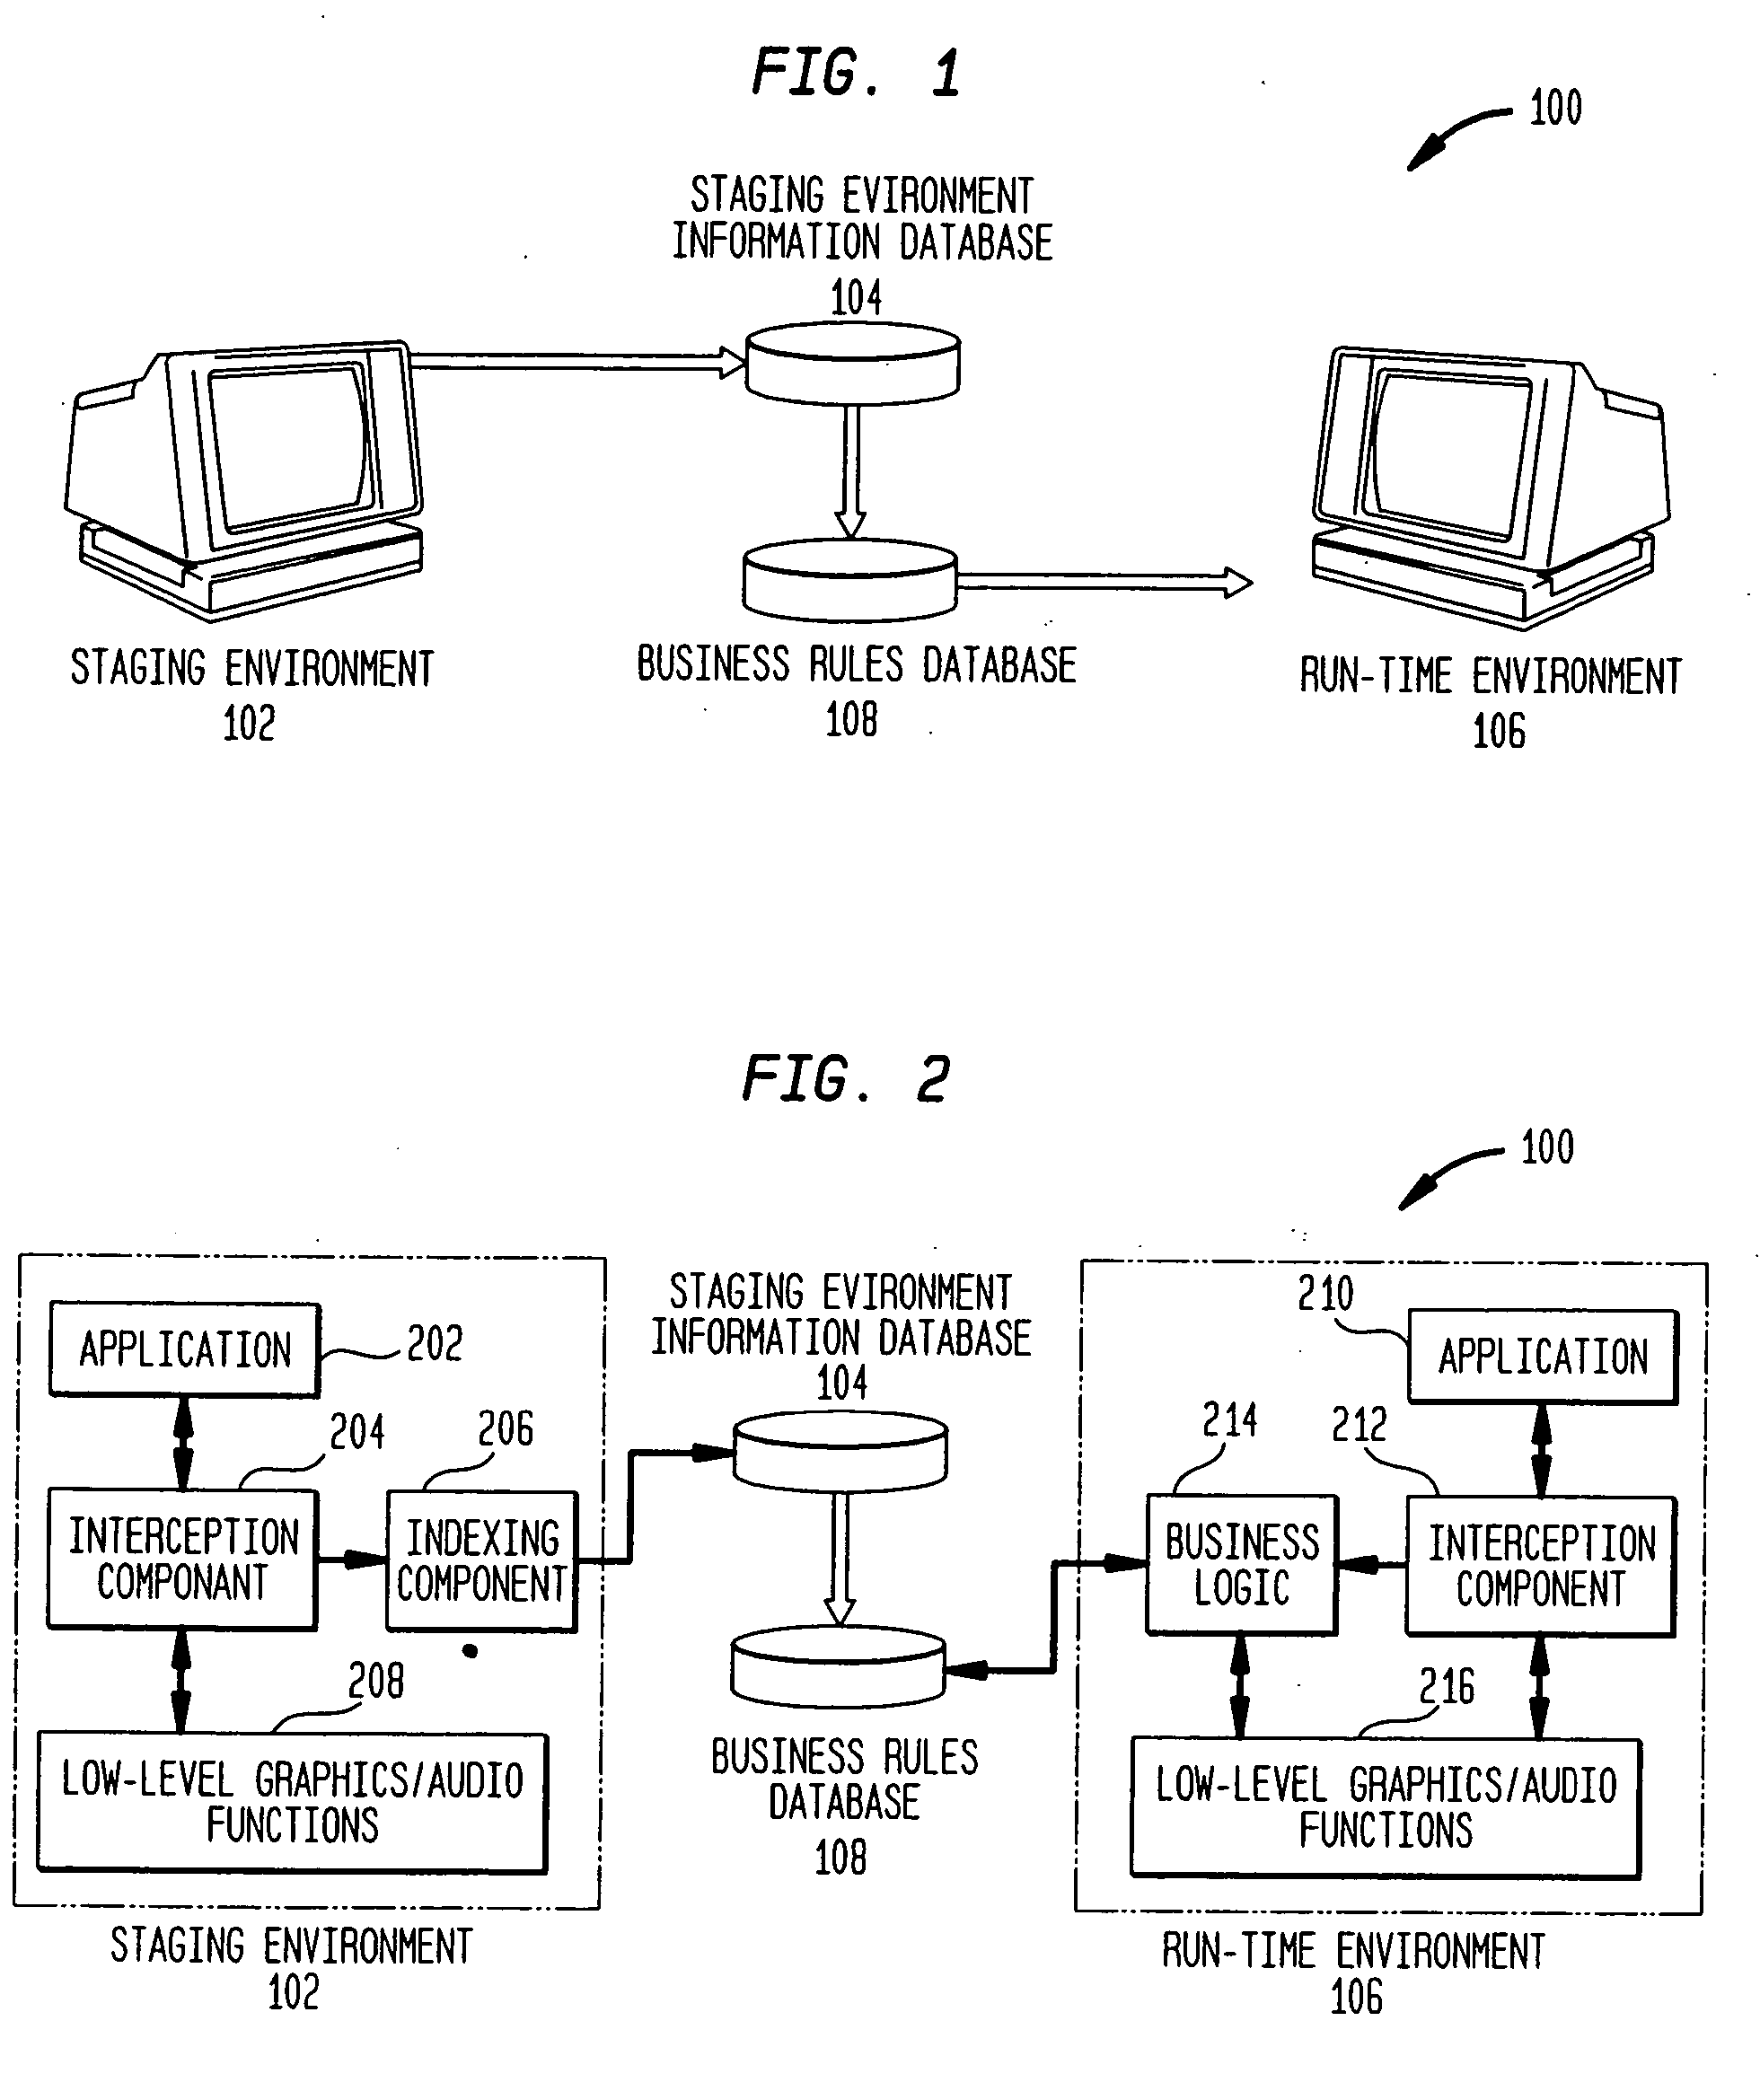 System, method and computer program product for dynamically identifying, selecting and extracting graphical and media objects in frames or scenes rendered by a software application